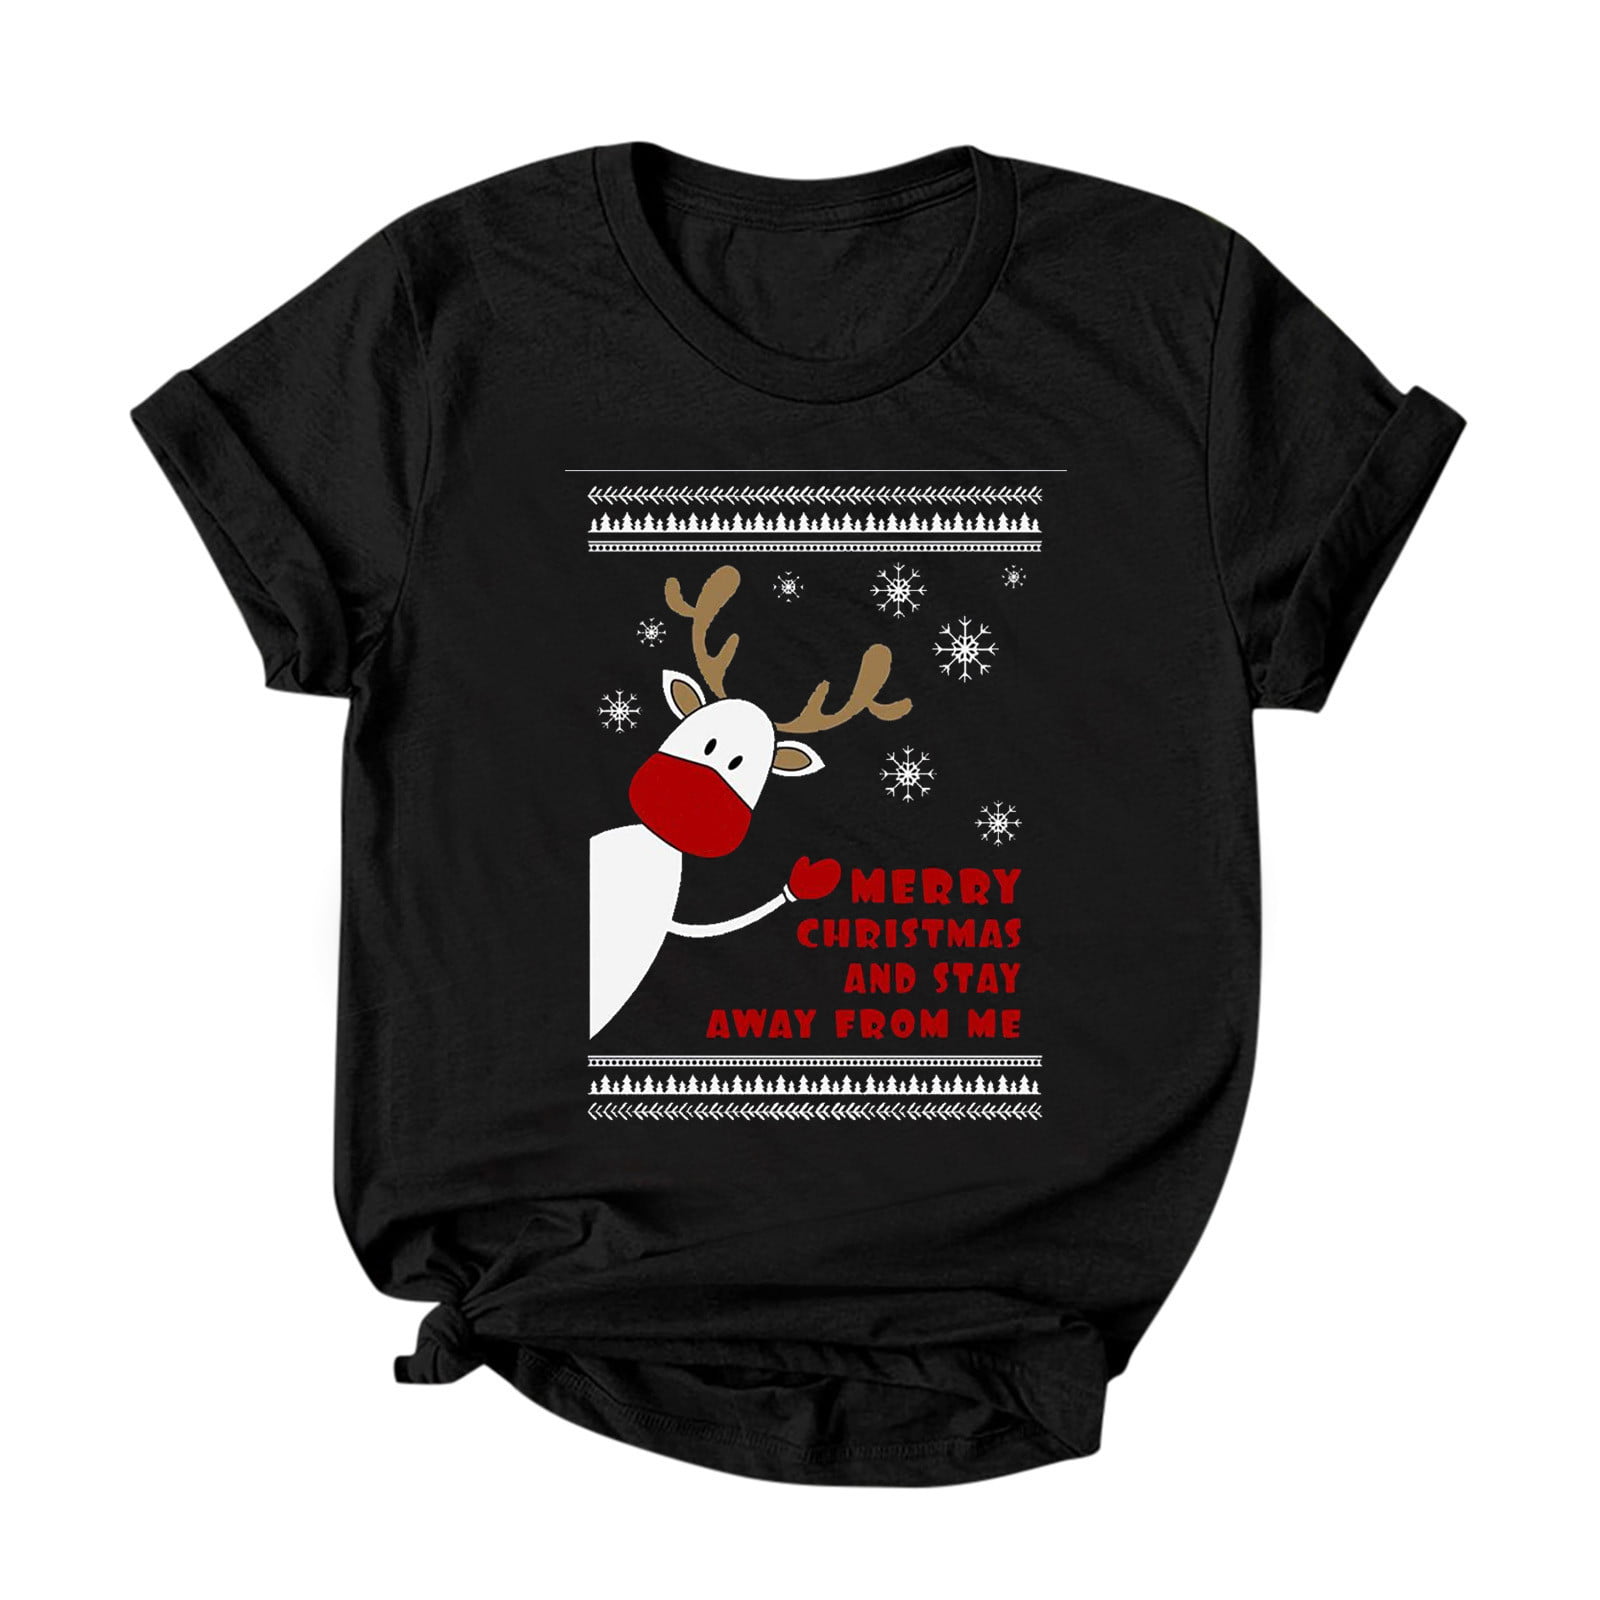 Merry Christmas Shirts for Women Short Sleeve Round Neck Letter Printed Graphic Xmas Top Tees Shirt Blouse Chaofanjiancai 